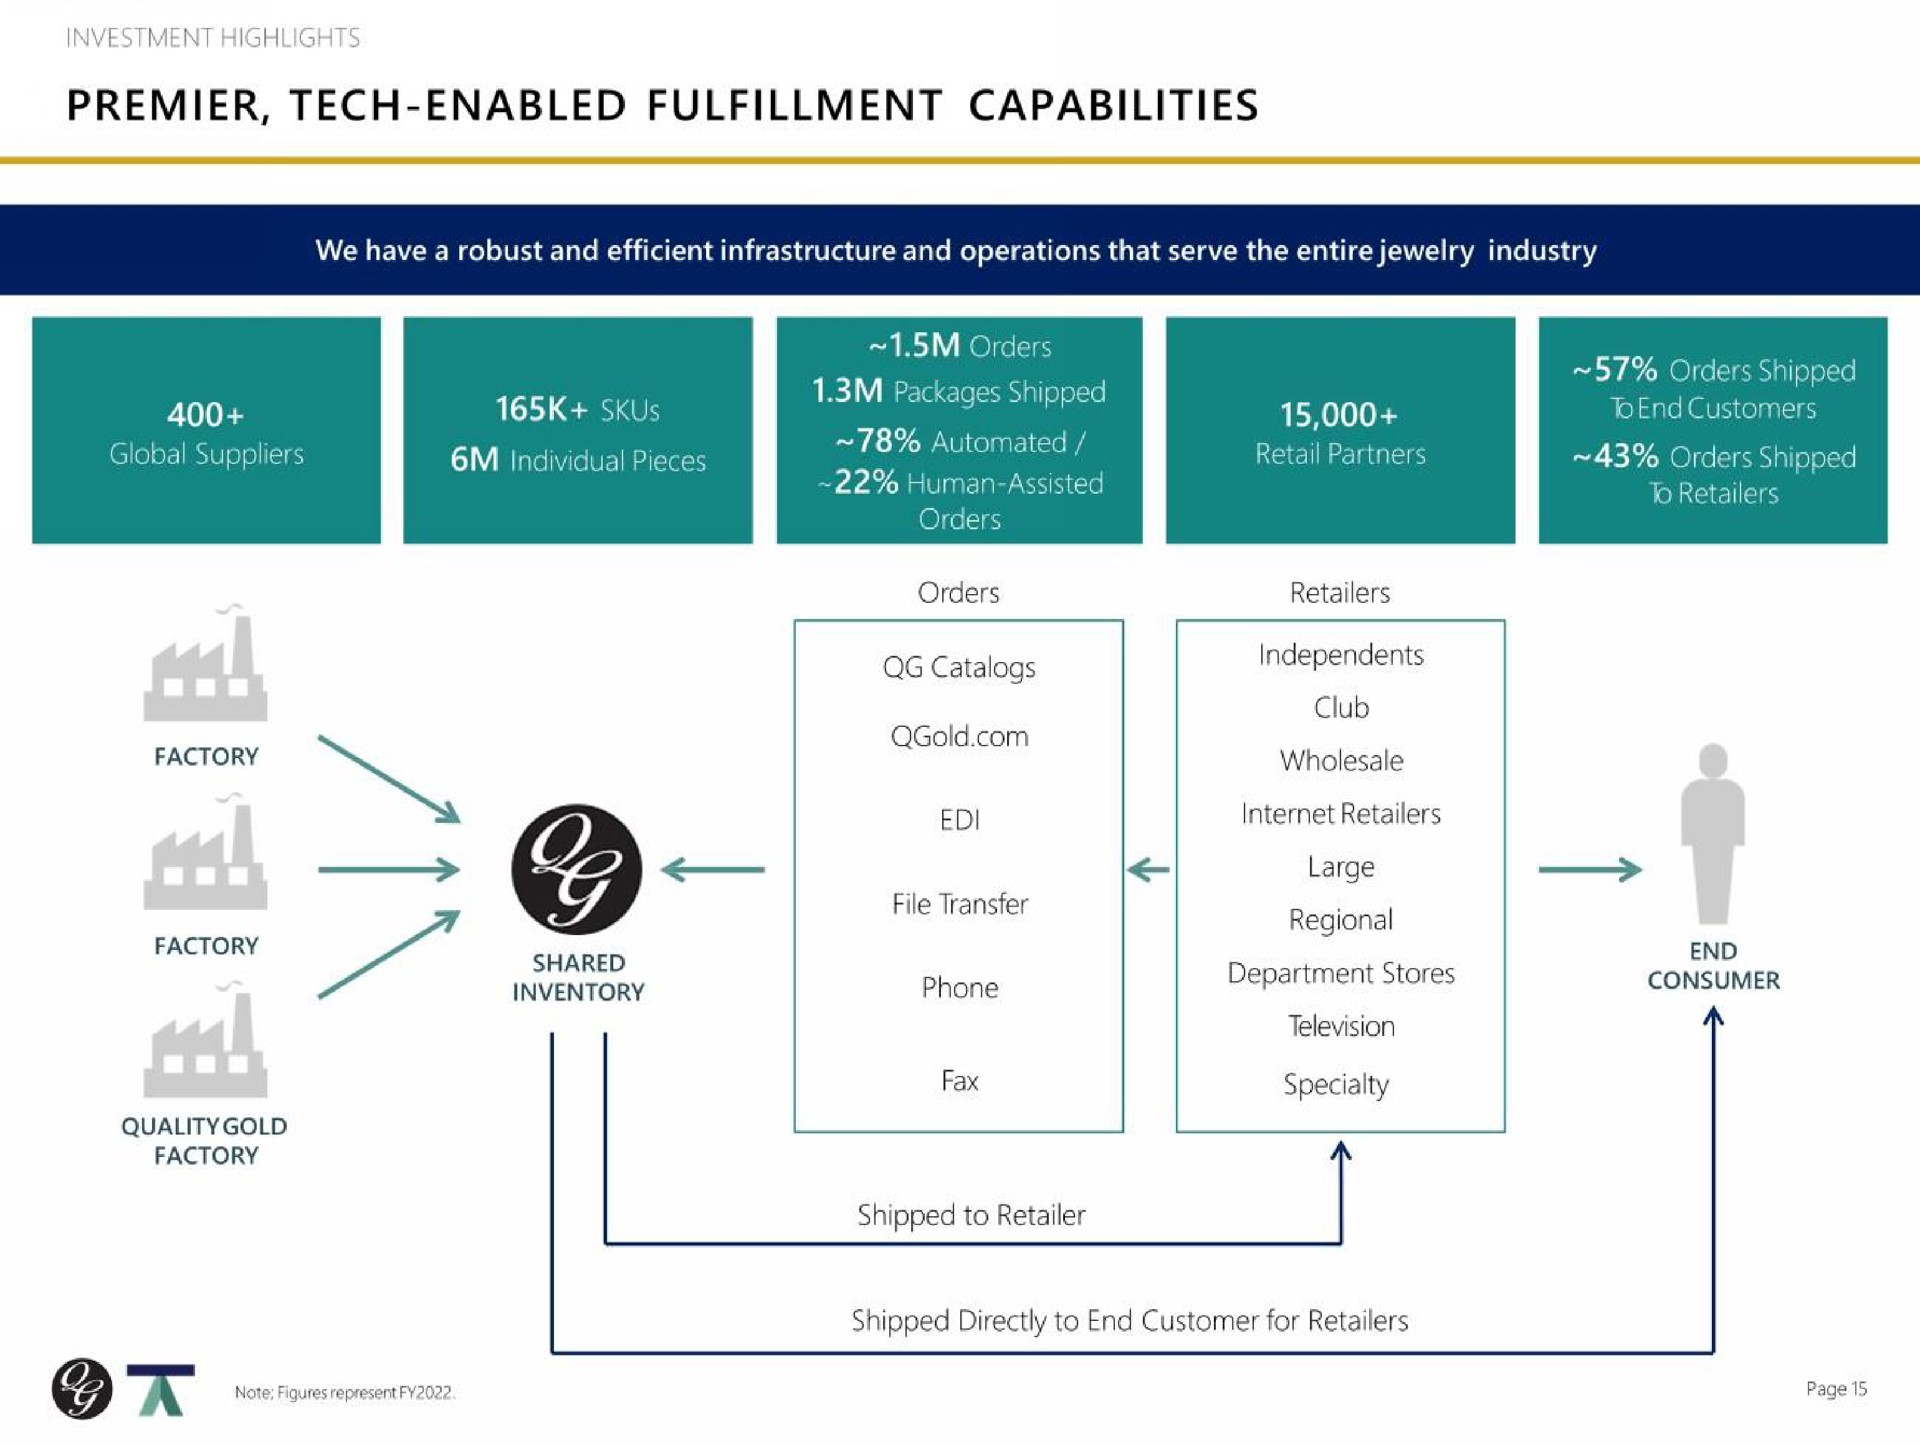 premier tech enabled fulfillment capabilities end factory factory | Quality Gold